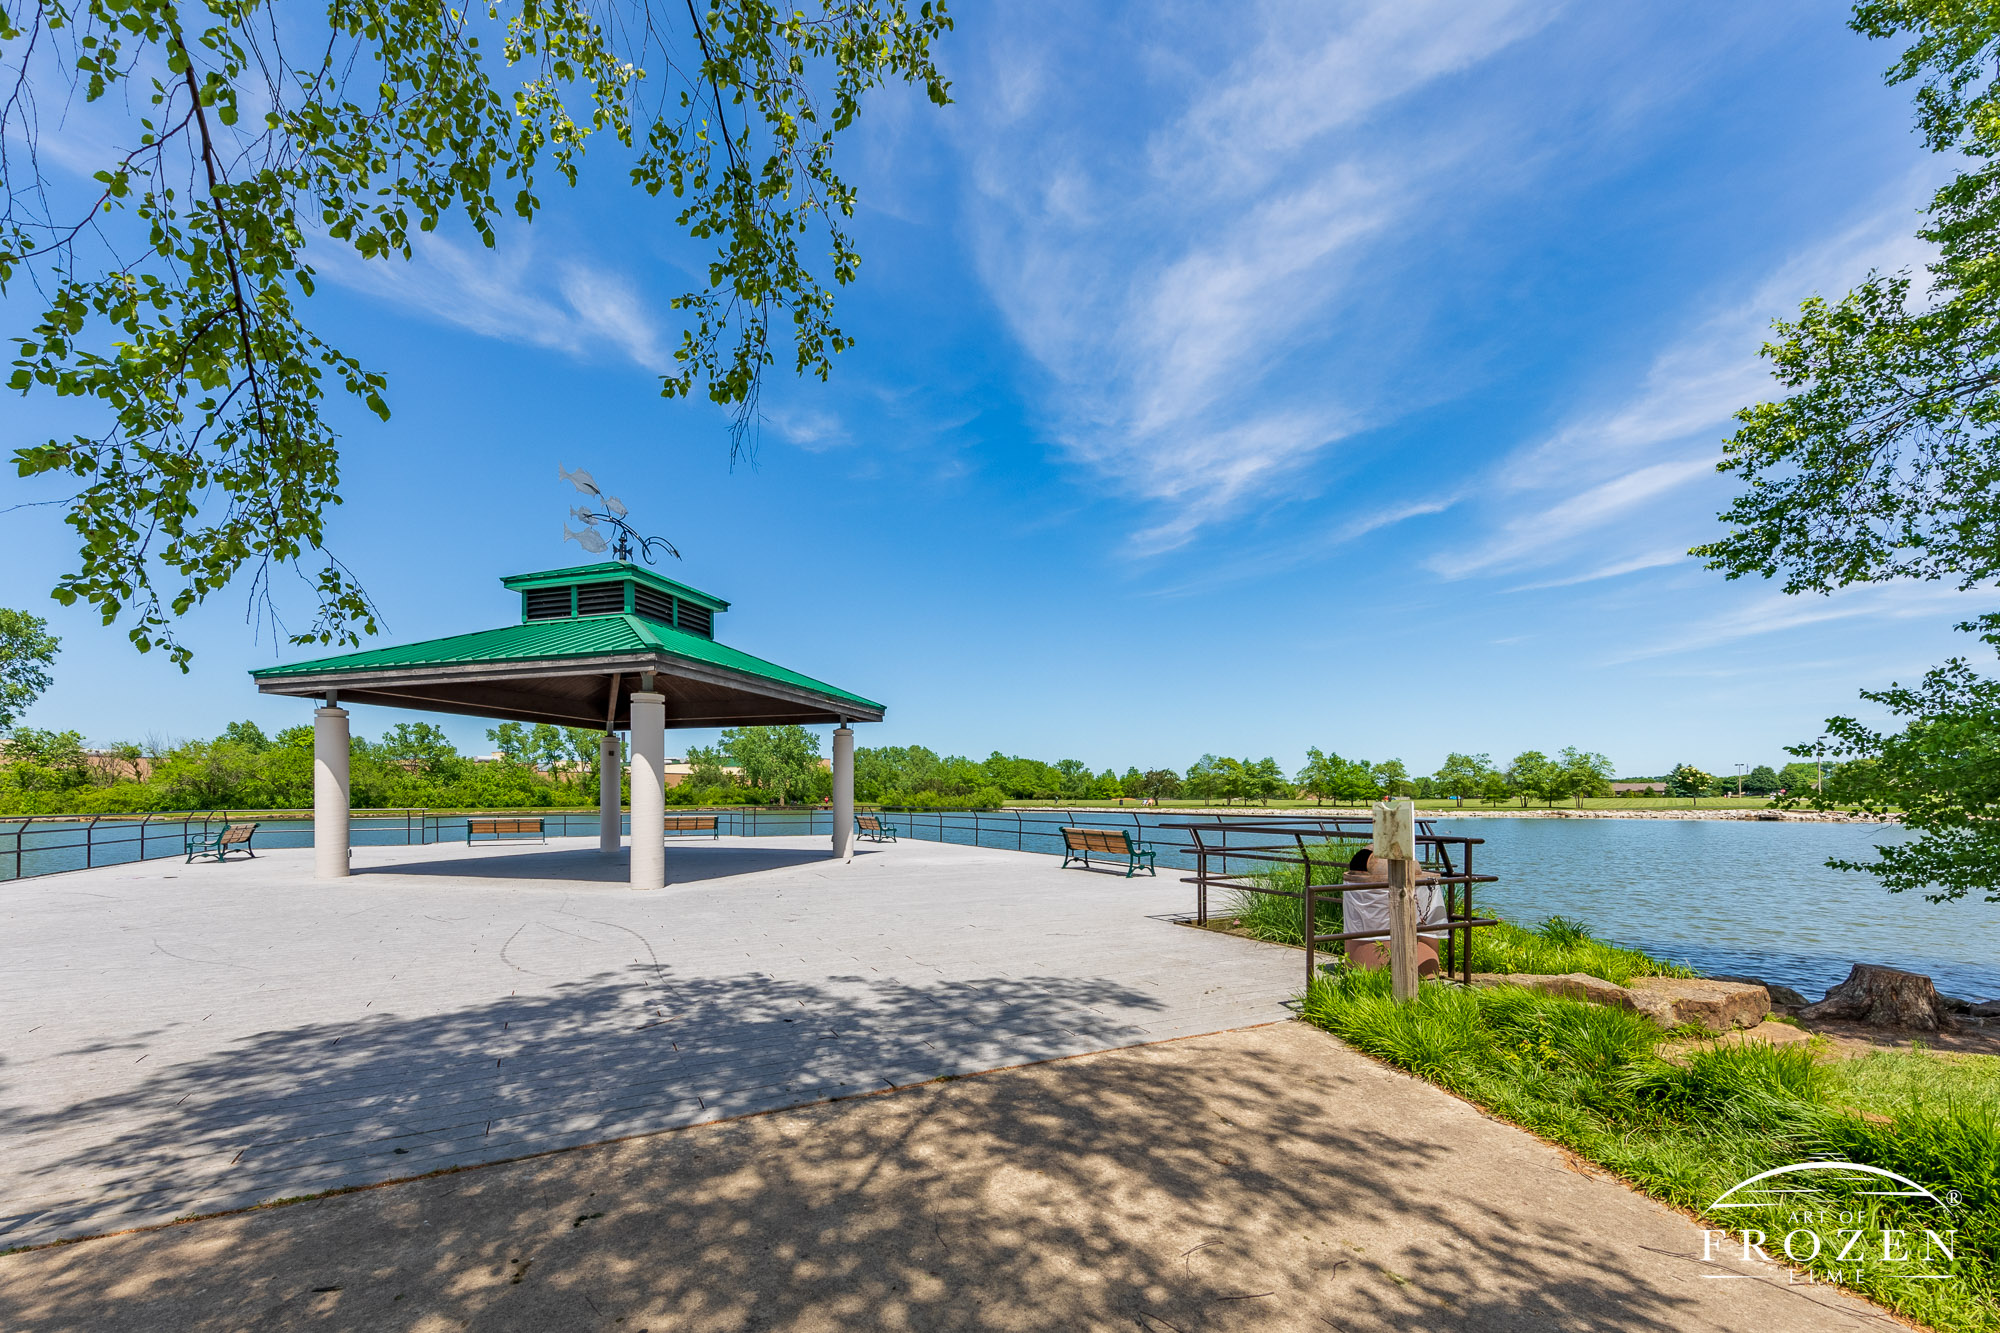 Delco Park offers Kettering Ohio residents a large pond and walking paths and holds the city’s Veteran’s Plaza.